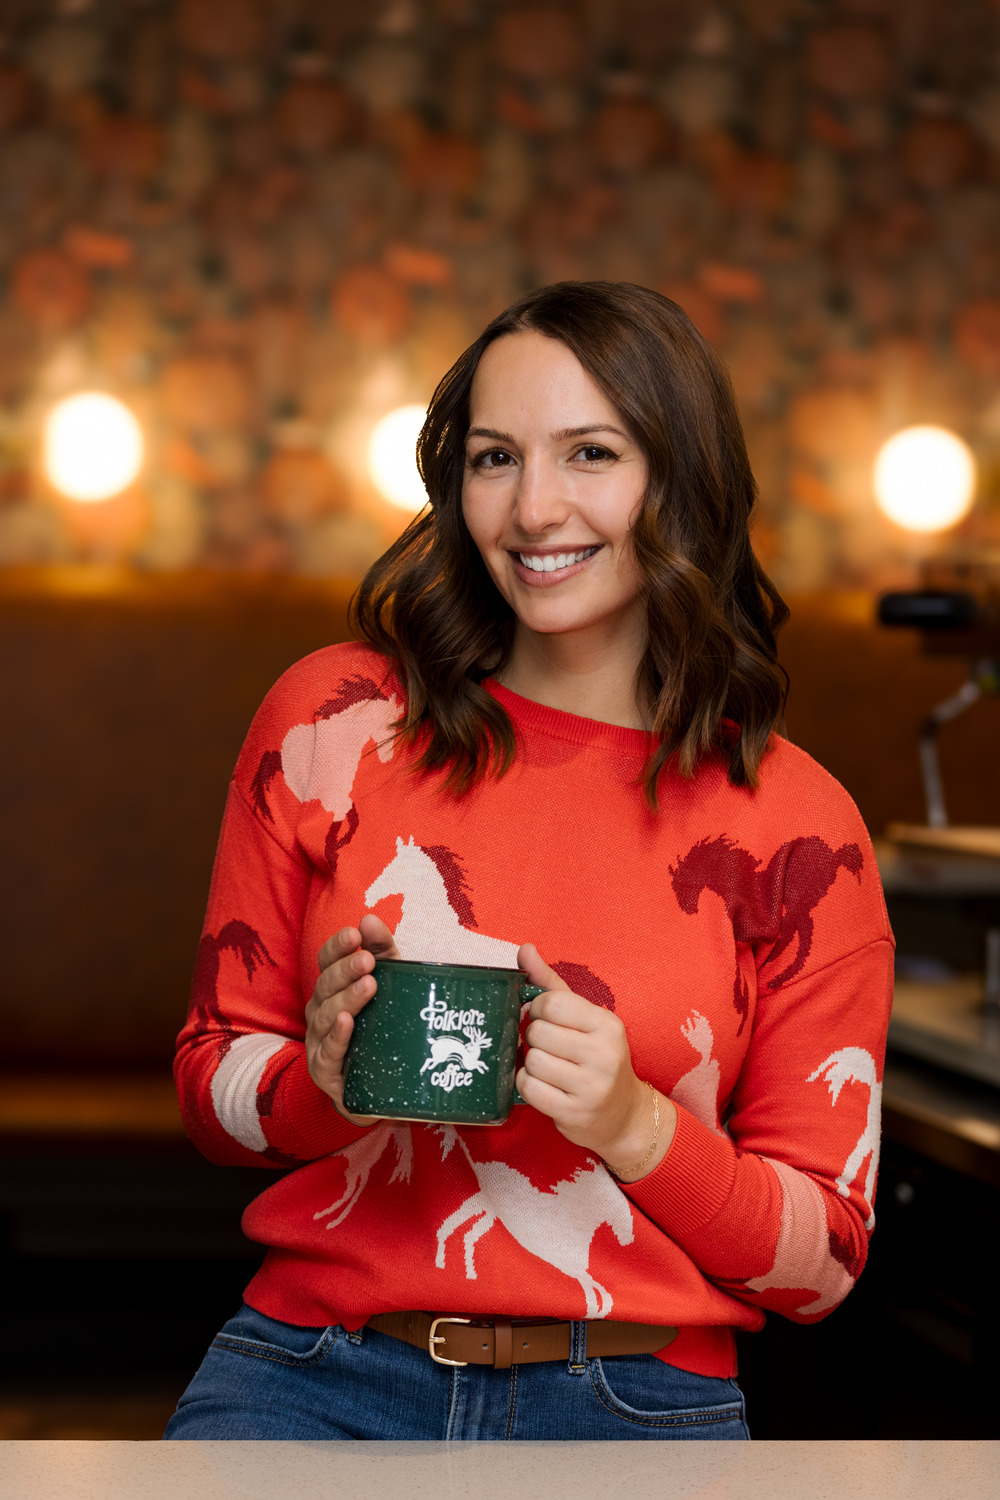 A woman smiles warmly at the camera while holding a green mug labeled "Folklore Coffee." She is wearing a bright orange sweater with a horse pattern, and the background features a softly lit, cozy coffee shop interior.